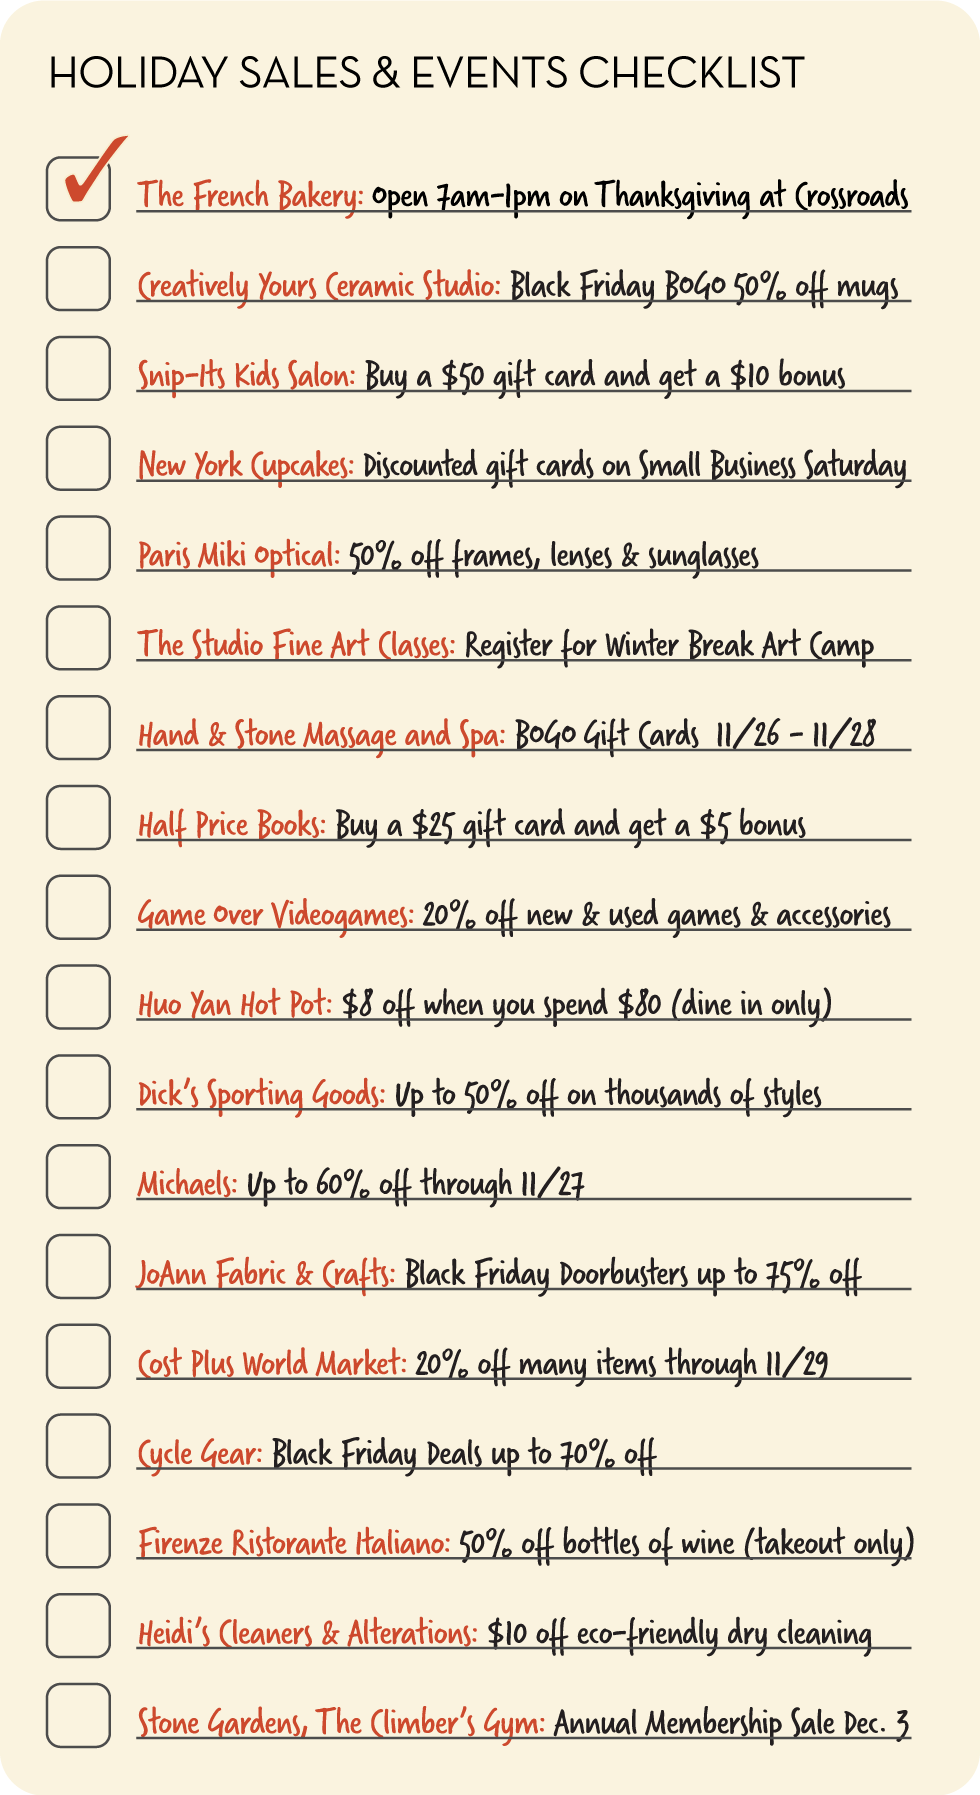 Holiday-Sales-Checklist-980.png (1)